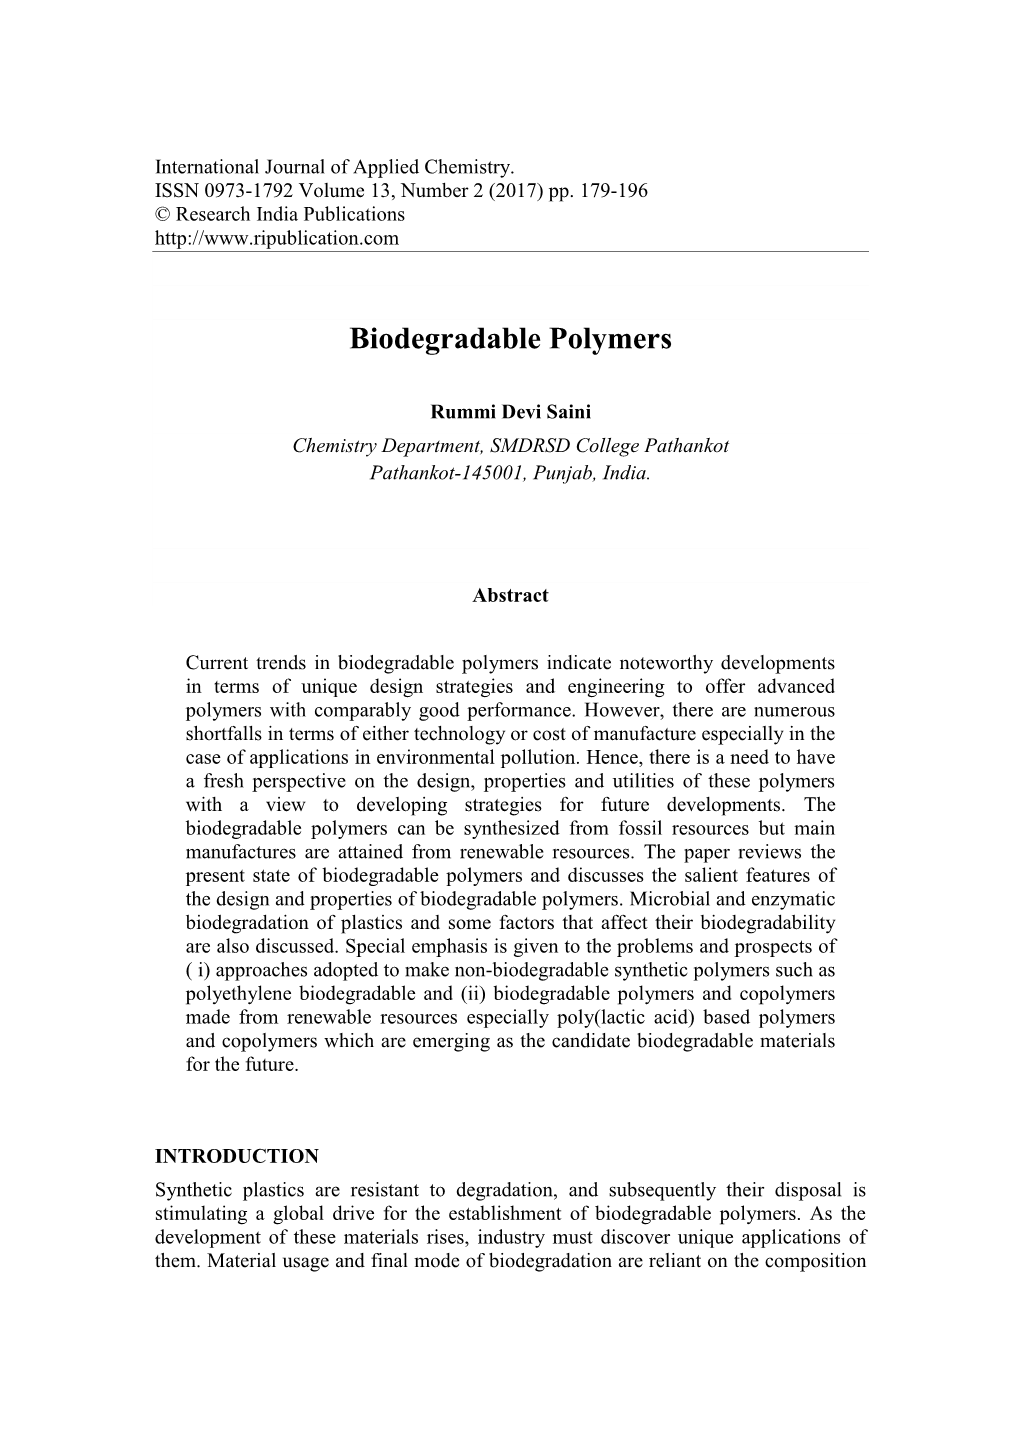 Biodegradable Polymers